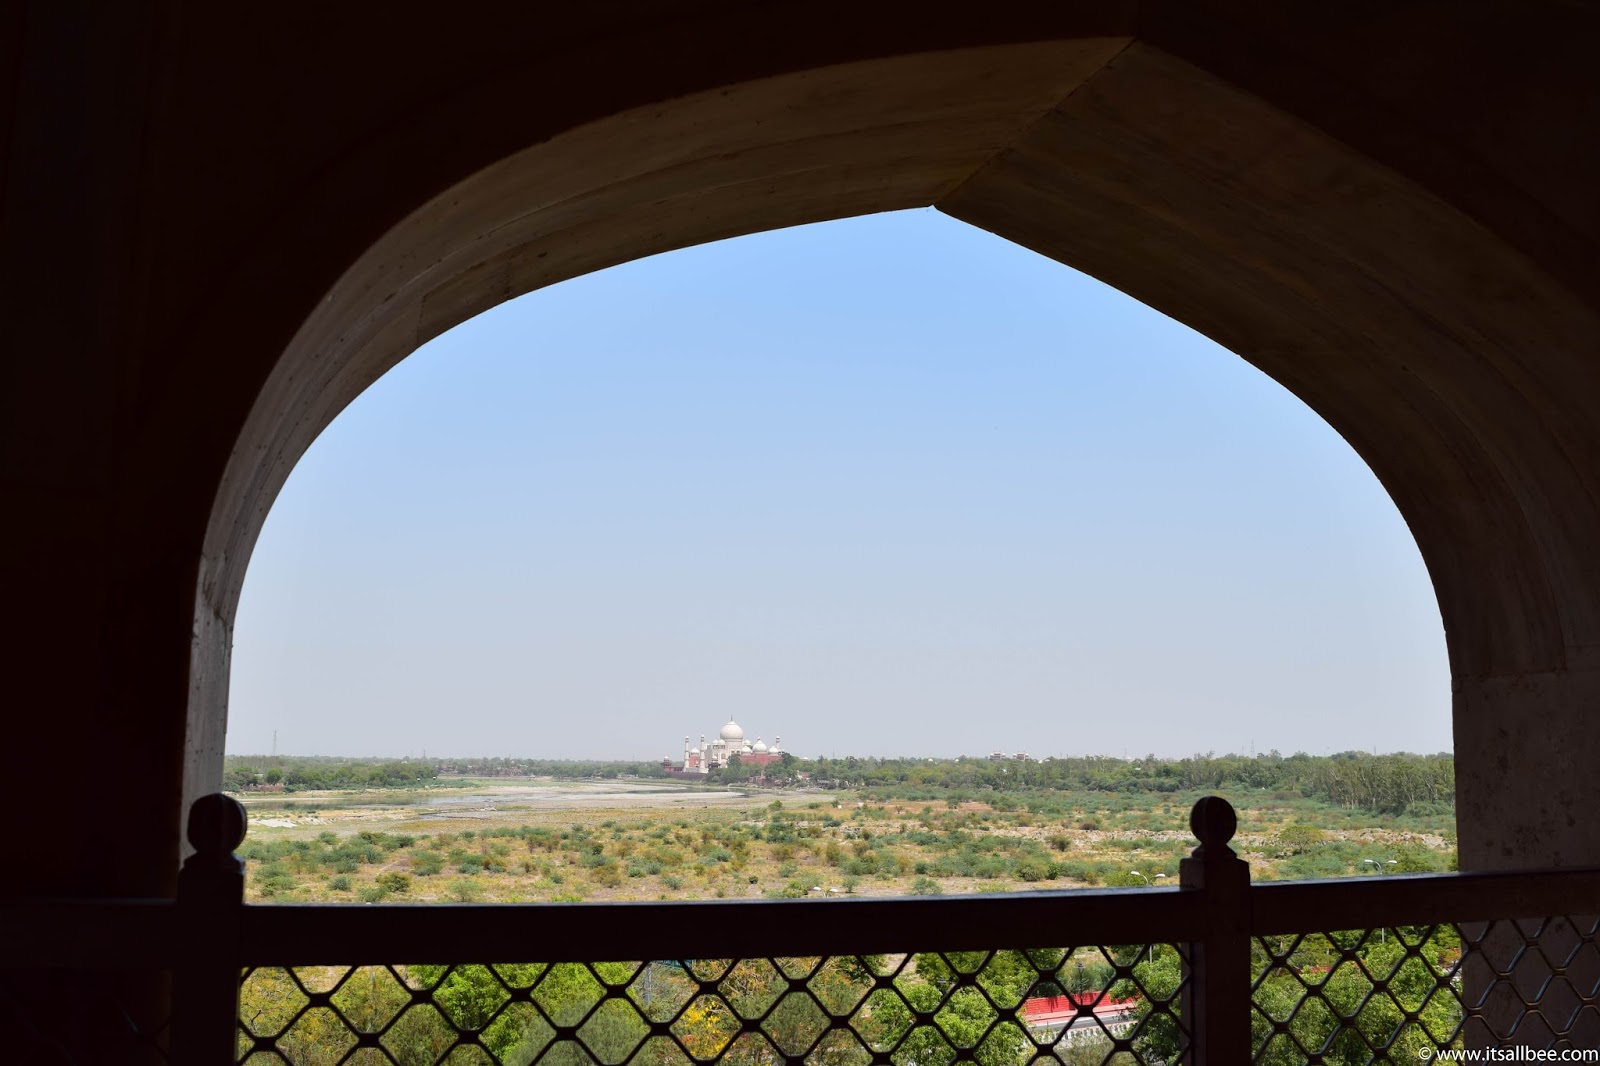 Visiting of The Agra Fort - Photo by Bianca Malata - www.itsallbee.com